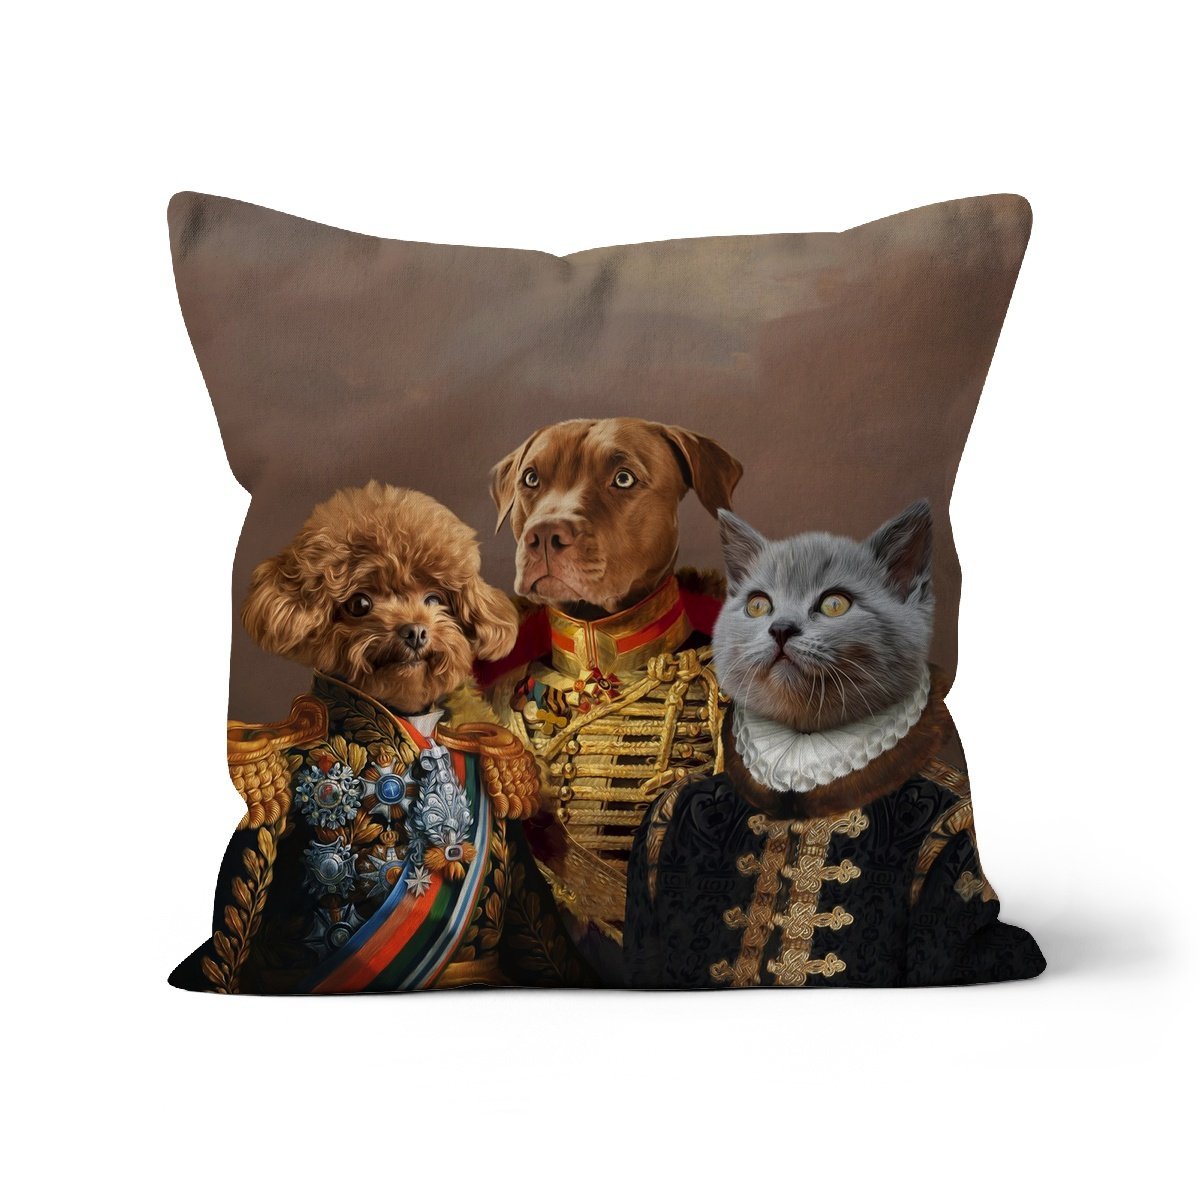 The 3 Brothers In Arms: Custom Pet Cushion - Paw & Glory - #pet portraits# - #dog portraits# - #pet portraits uk#paw & glory, custom pet portrait pillow,dog memory pillow, photo pet pillow, custom pillow of your pet, pet pillow, custom cat pillows